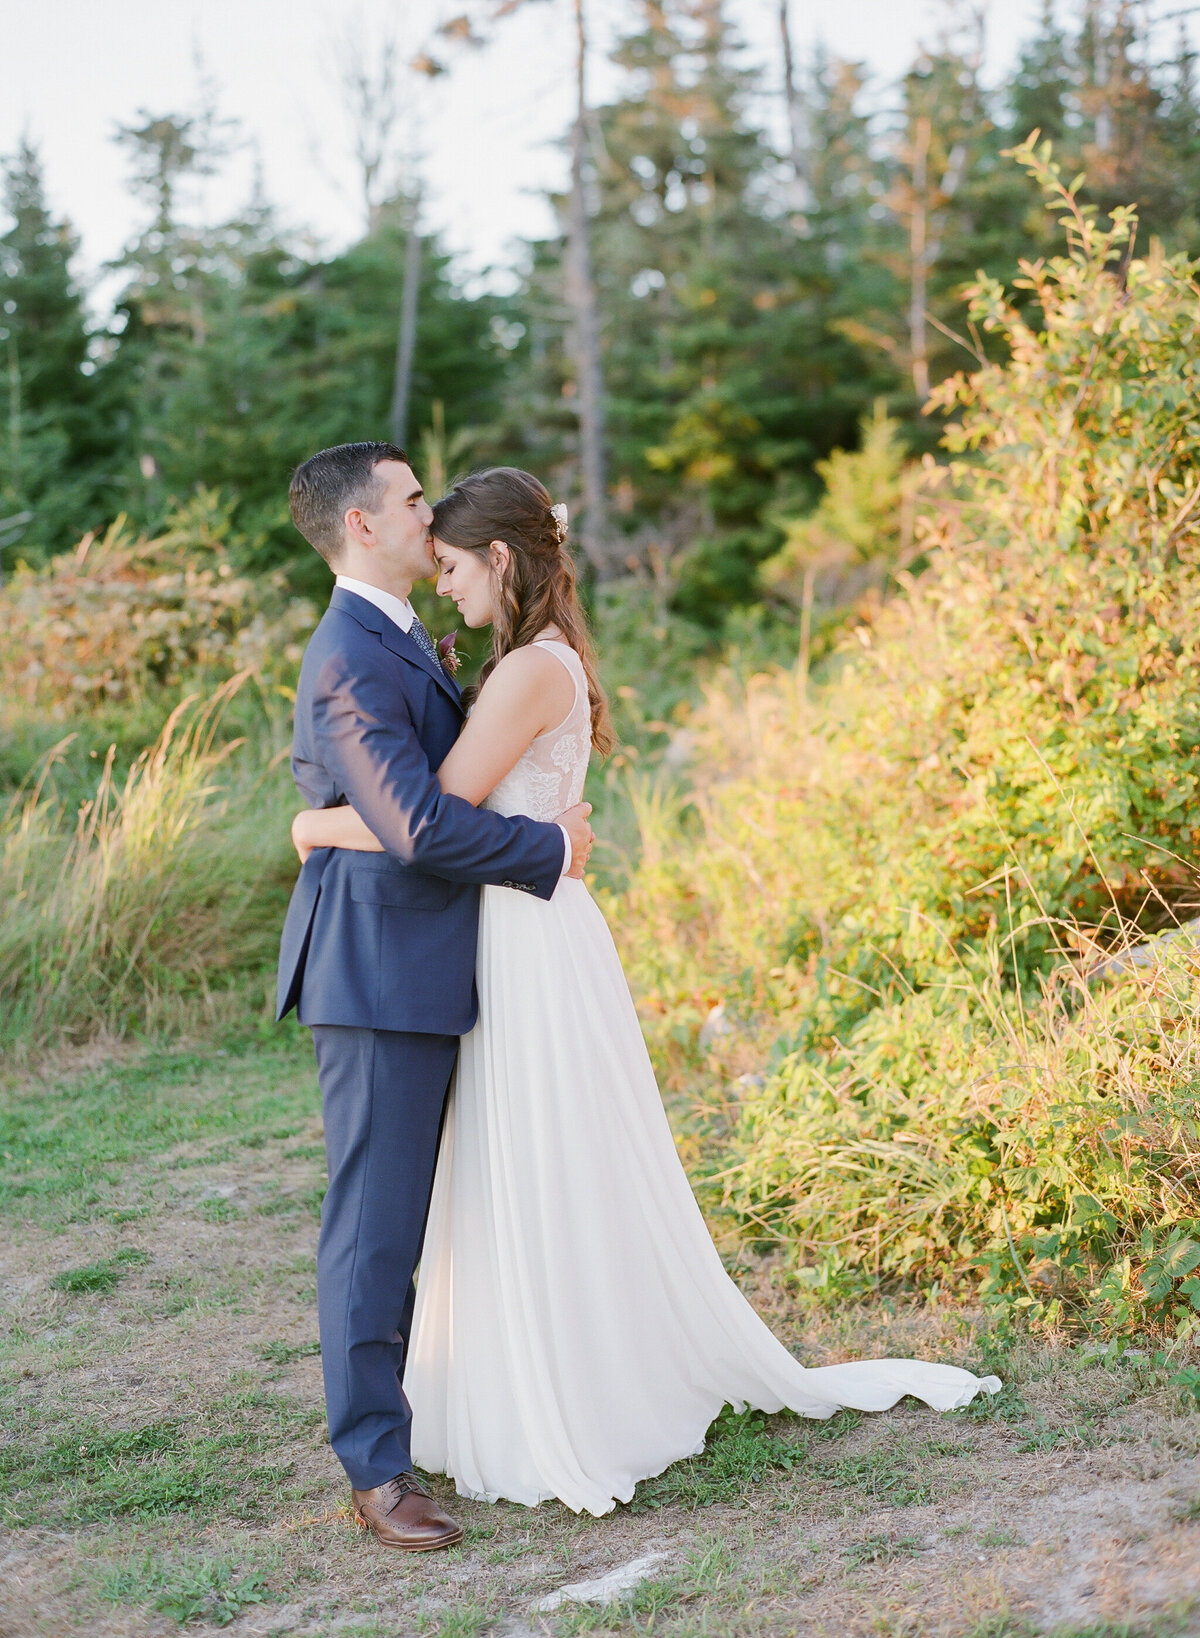 Jacqueline Anne Photography - Halifax Wedding Photographer - Jaclyn and Morgan-73